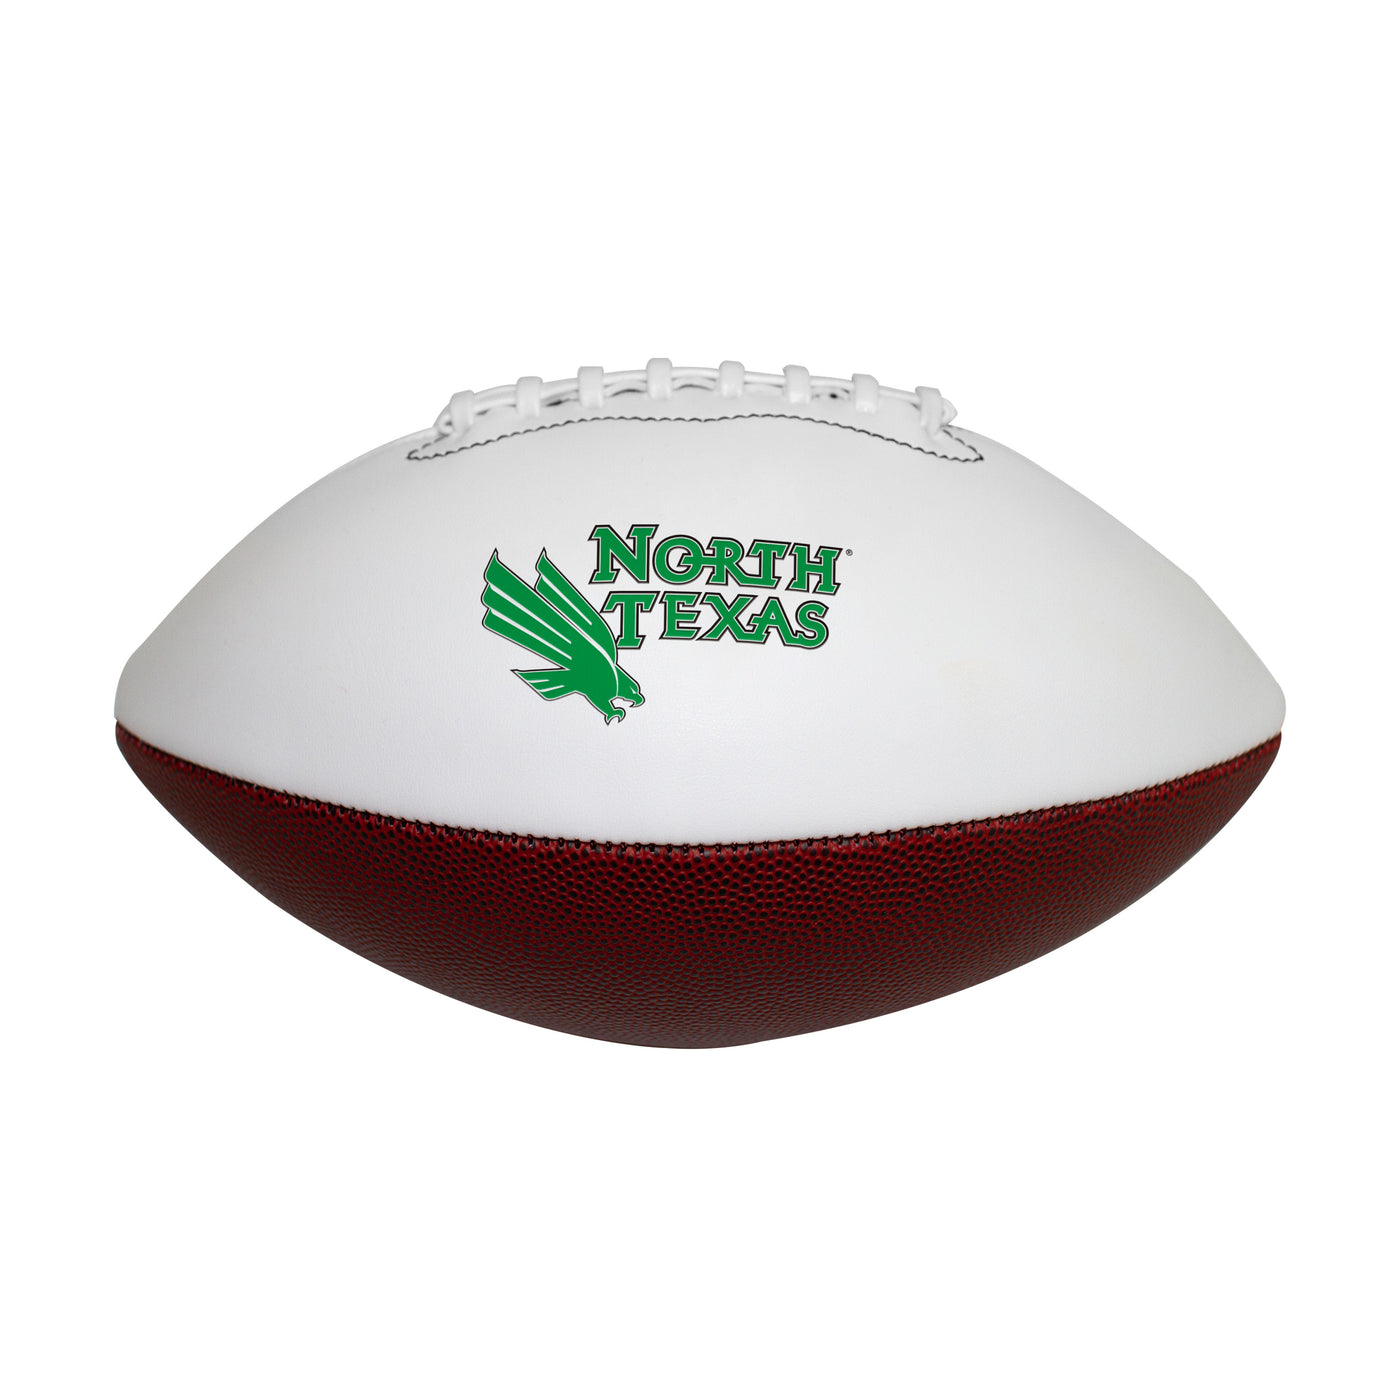 North Texas Official-Size Autograph Football